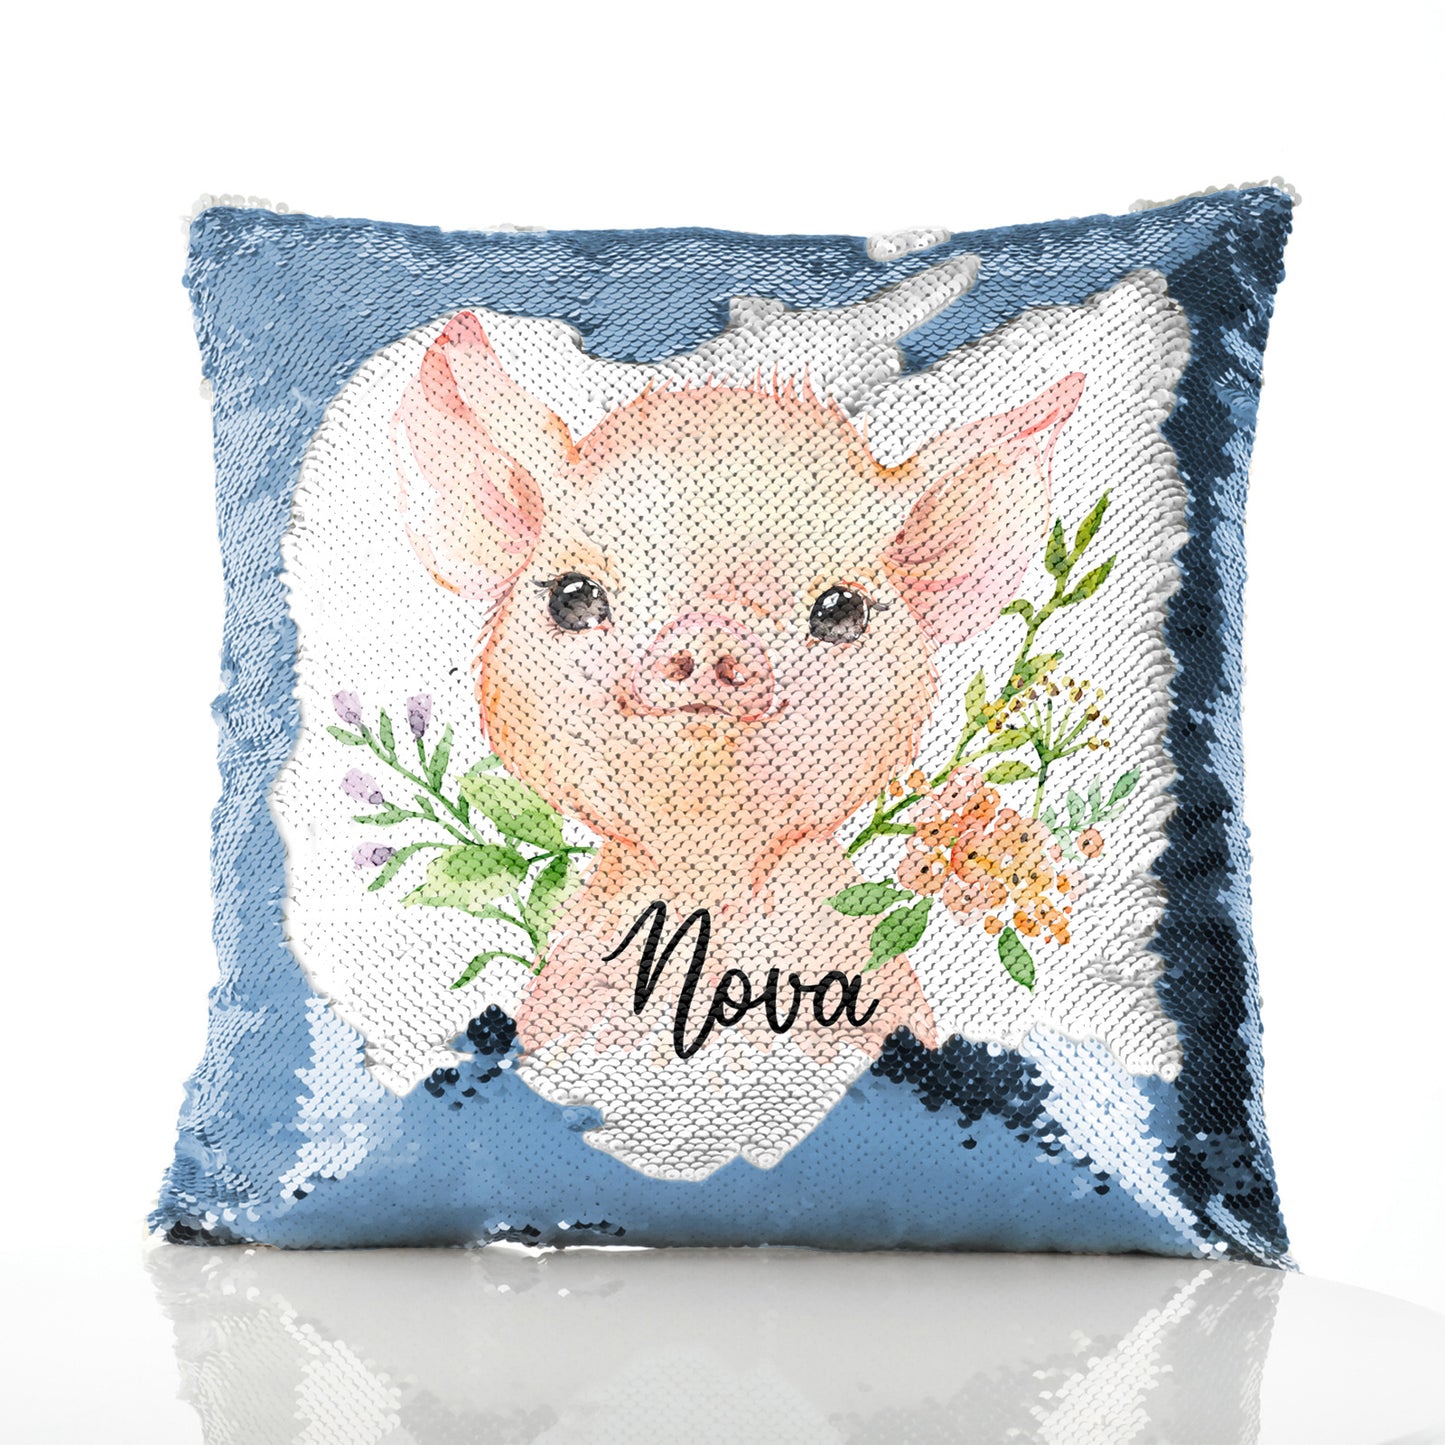 Personalised Sequin Cushion with Pink Pig Flowers and Cute Text